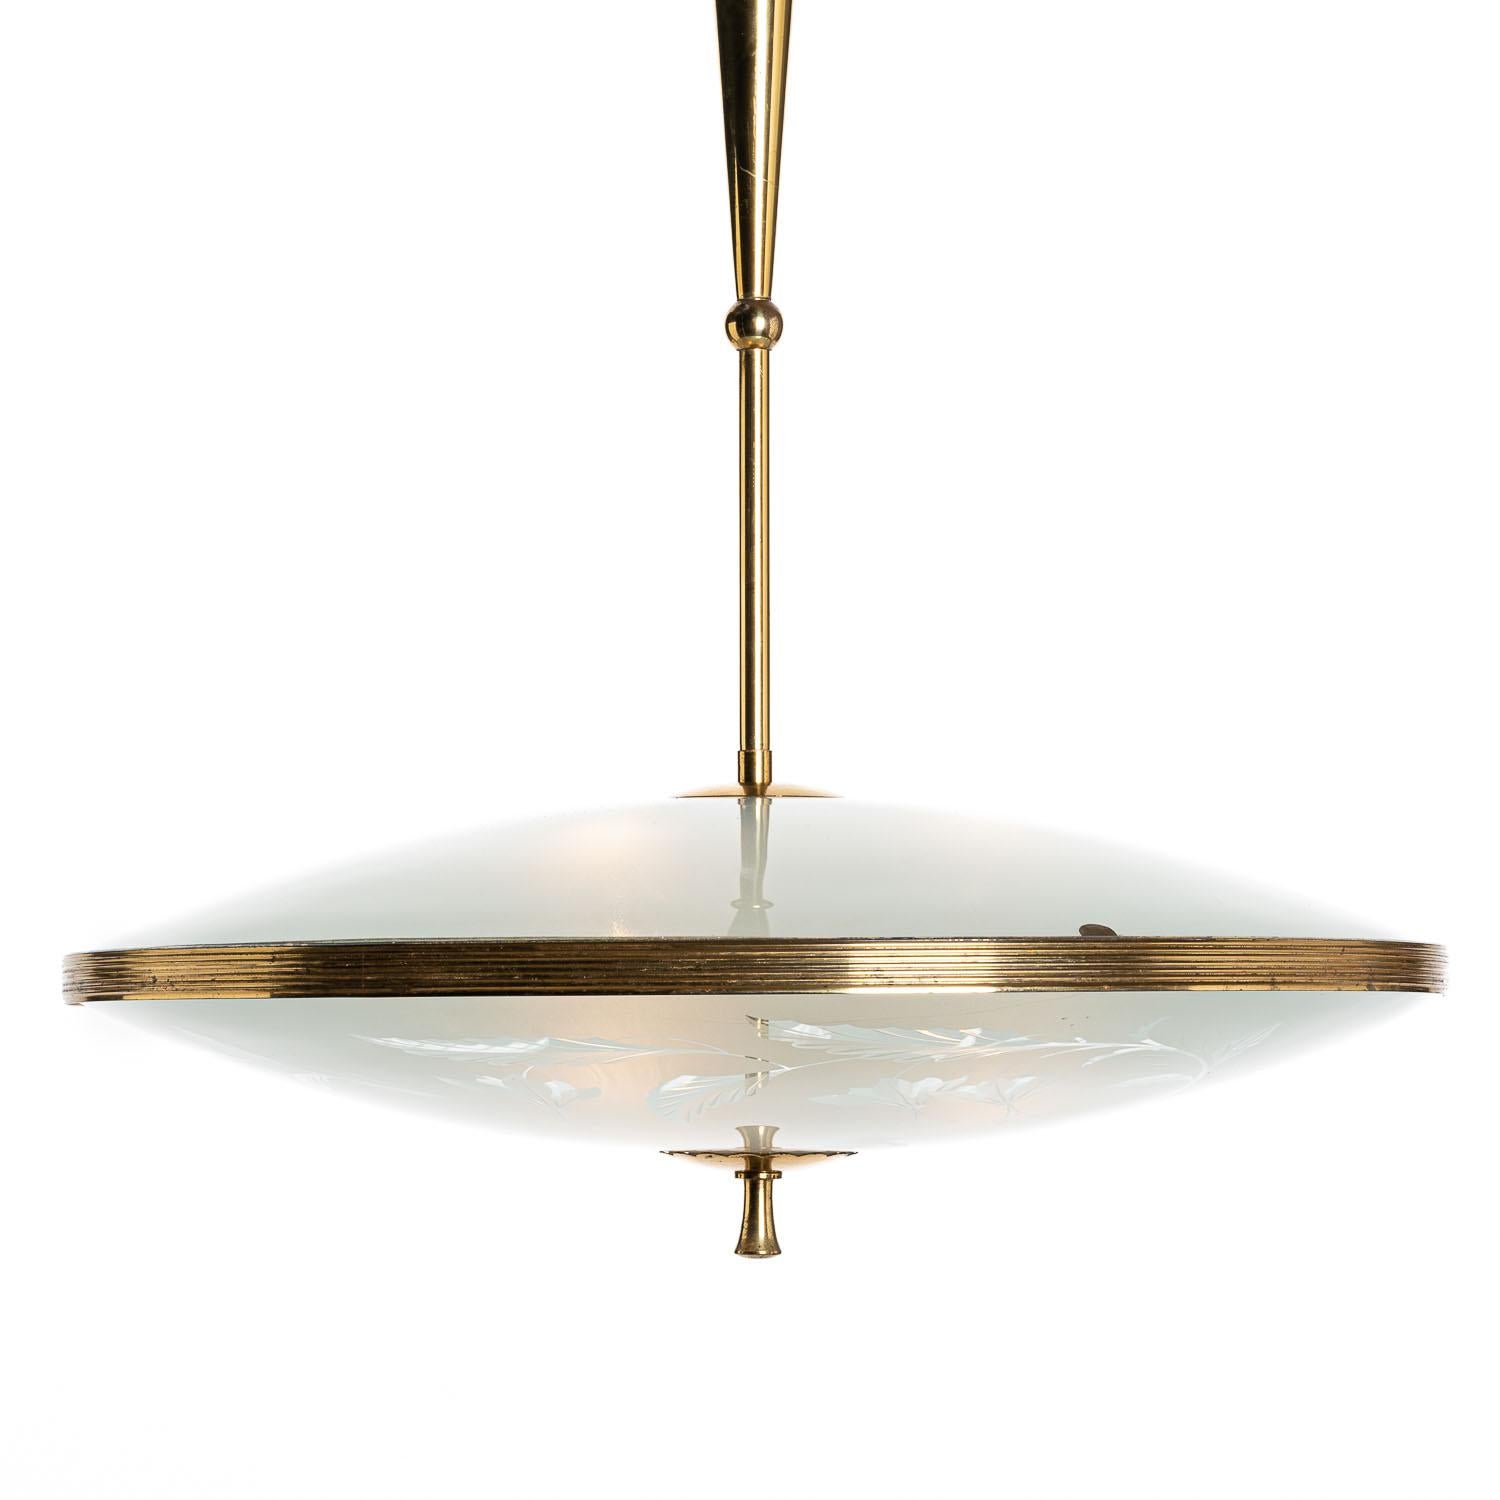 This large elegant piece consisting of a brass frame and 2 unique frosted and satin glass reflectors. 
The lower round curved glass reflector with floral motifs mounts below a round satin glass reflector. Finished off with a brass decorative ring.